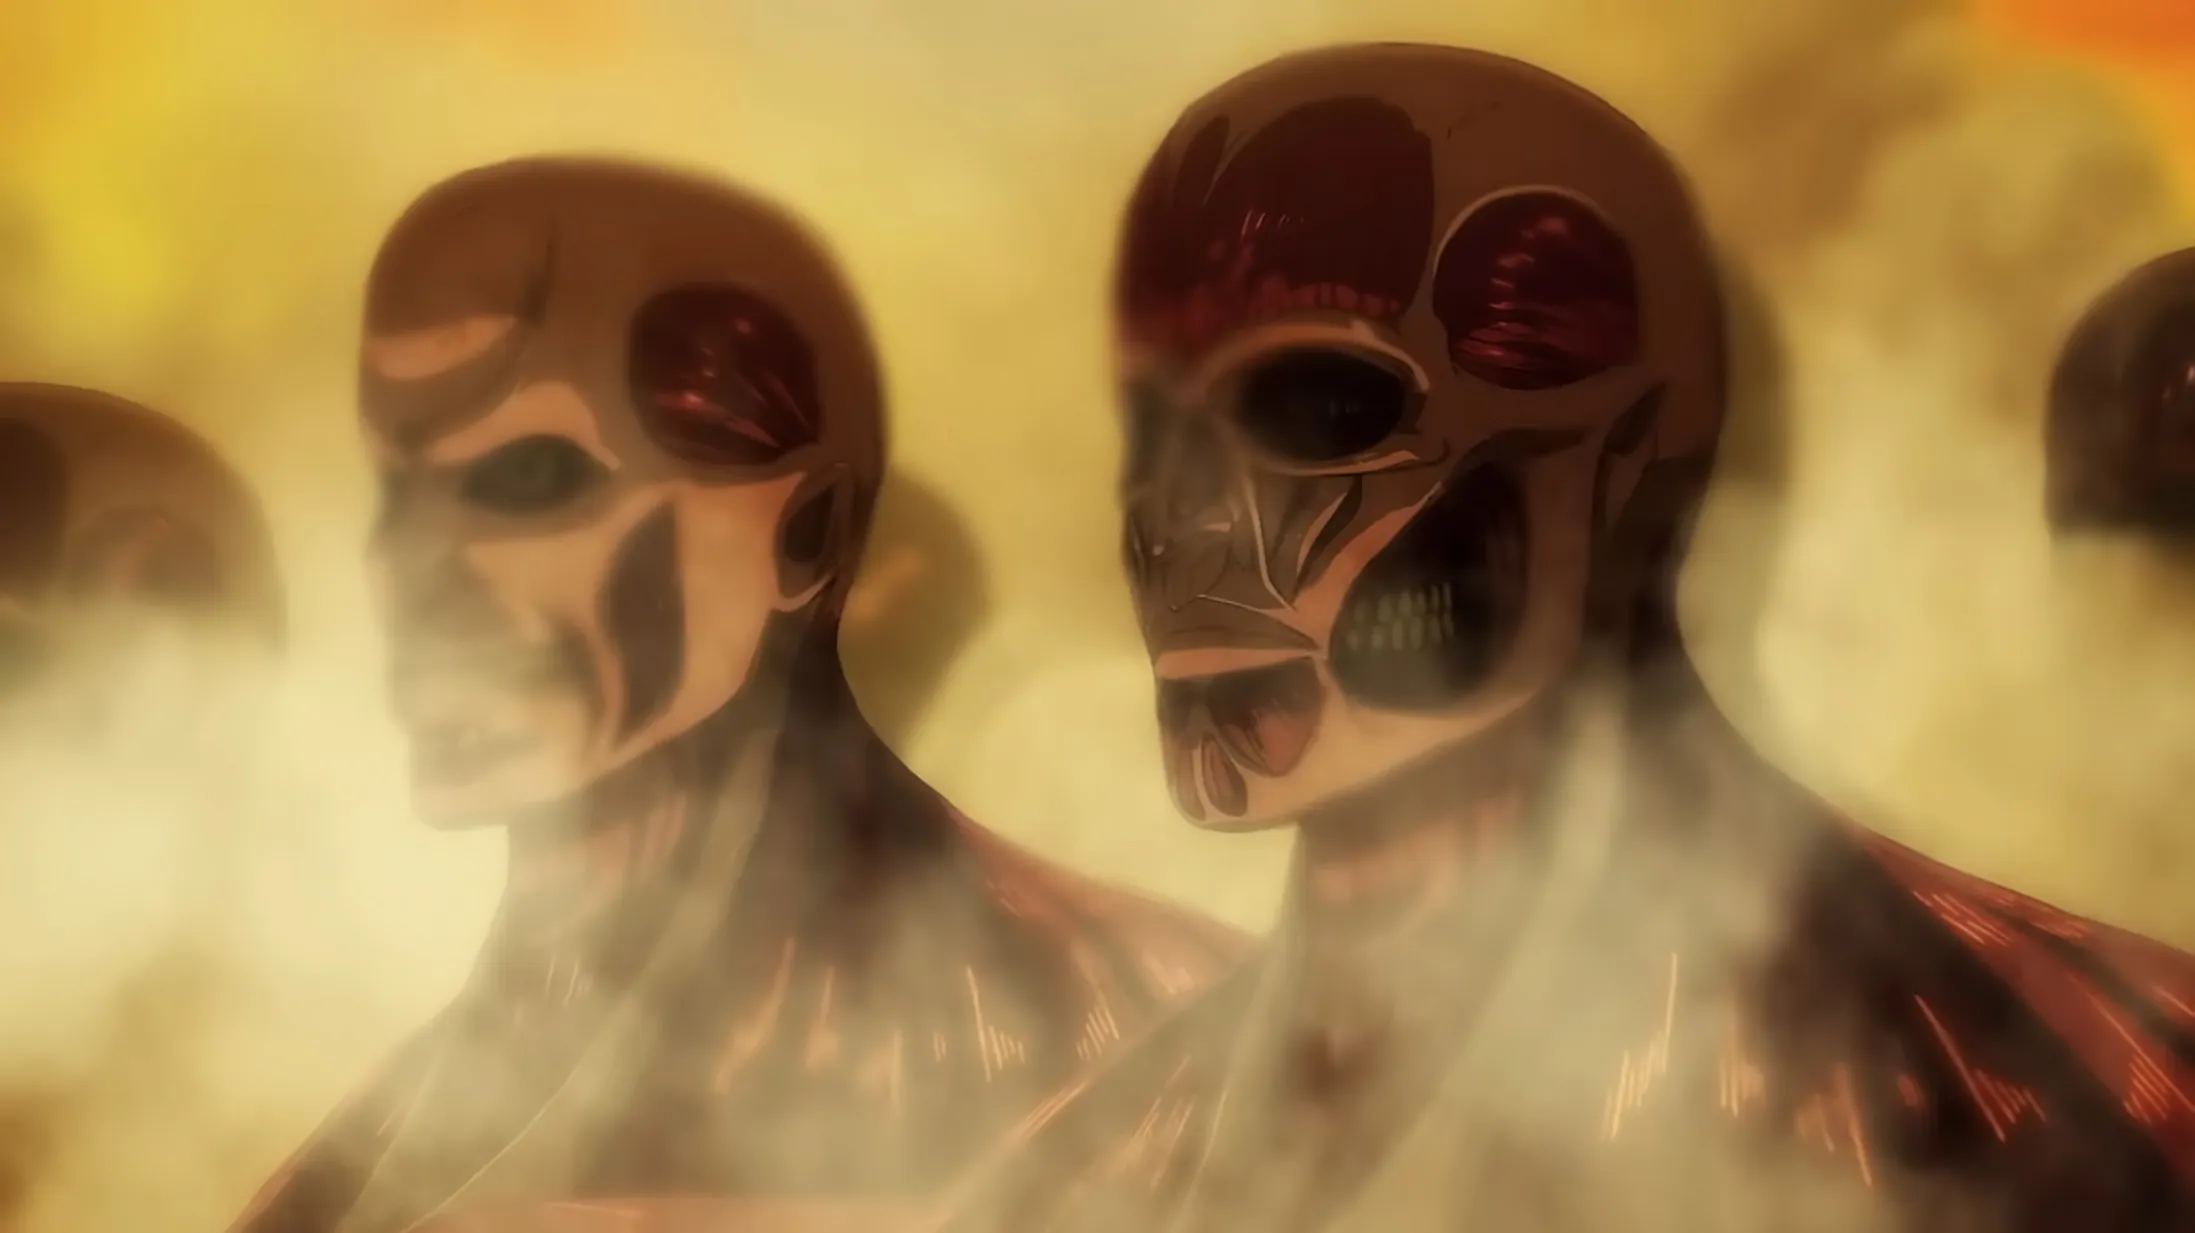 When Does Part 3 of 'Attack on Titan's' Final Season Air?